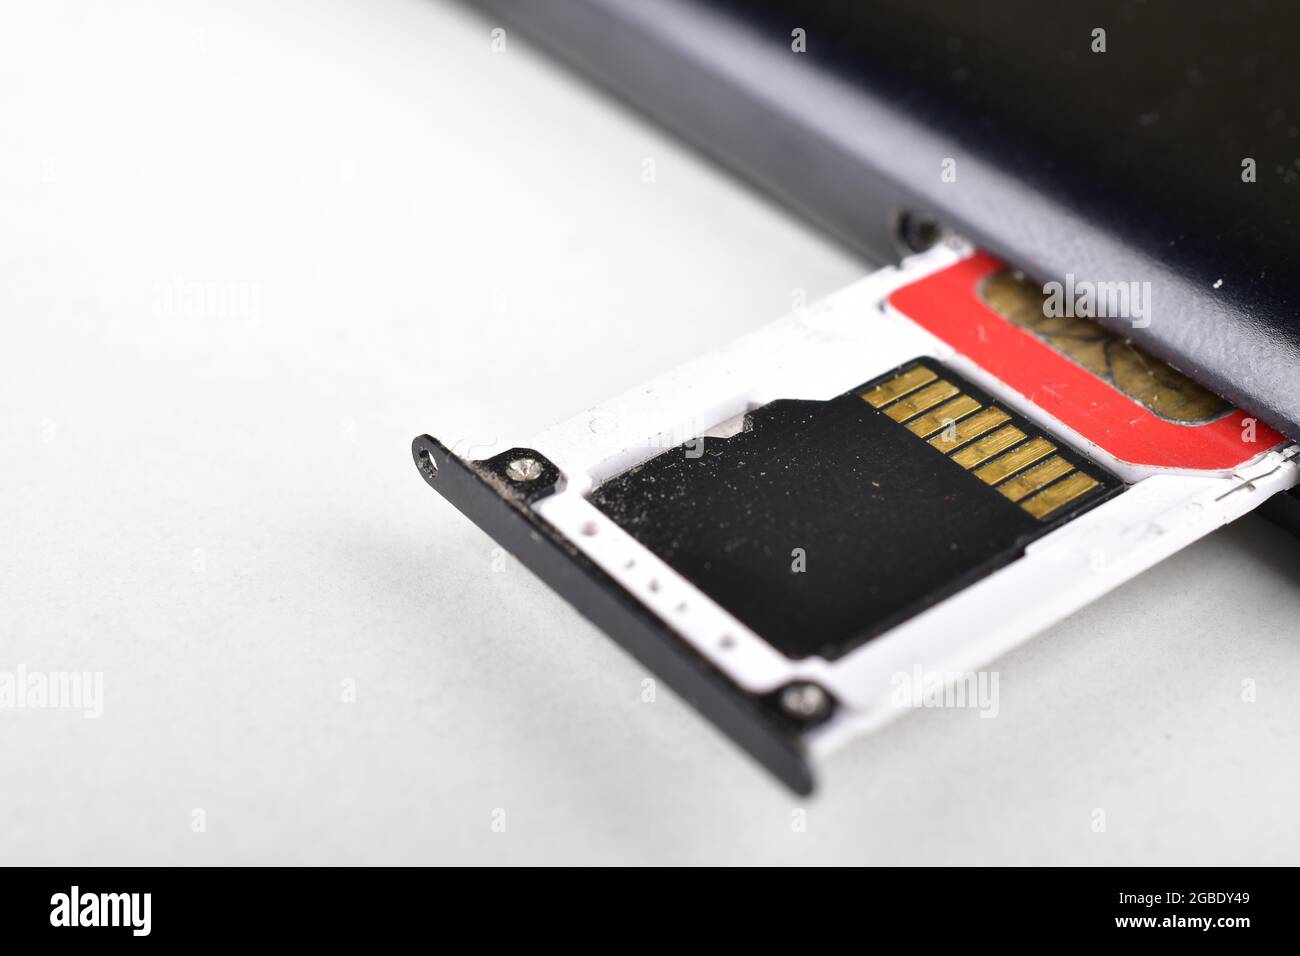 Removing Corrupt Memory Card and Sim From Smartphone Stock Photo